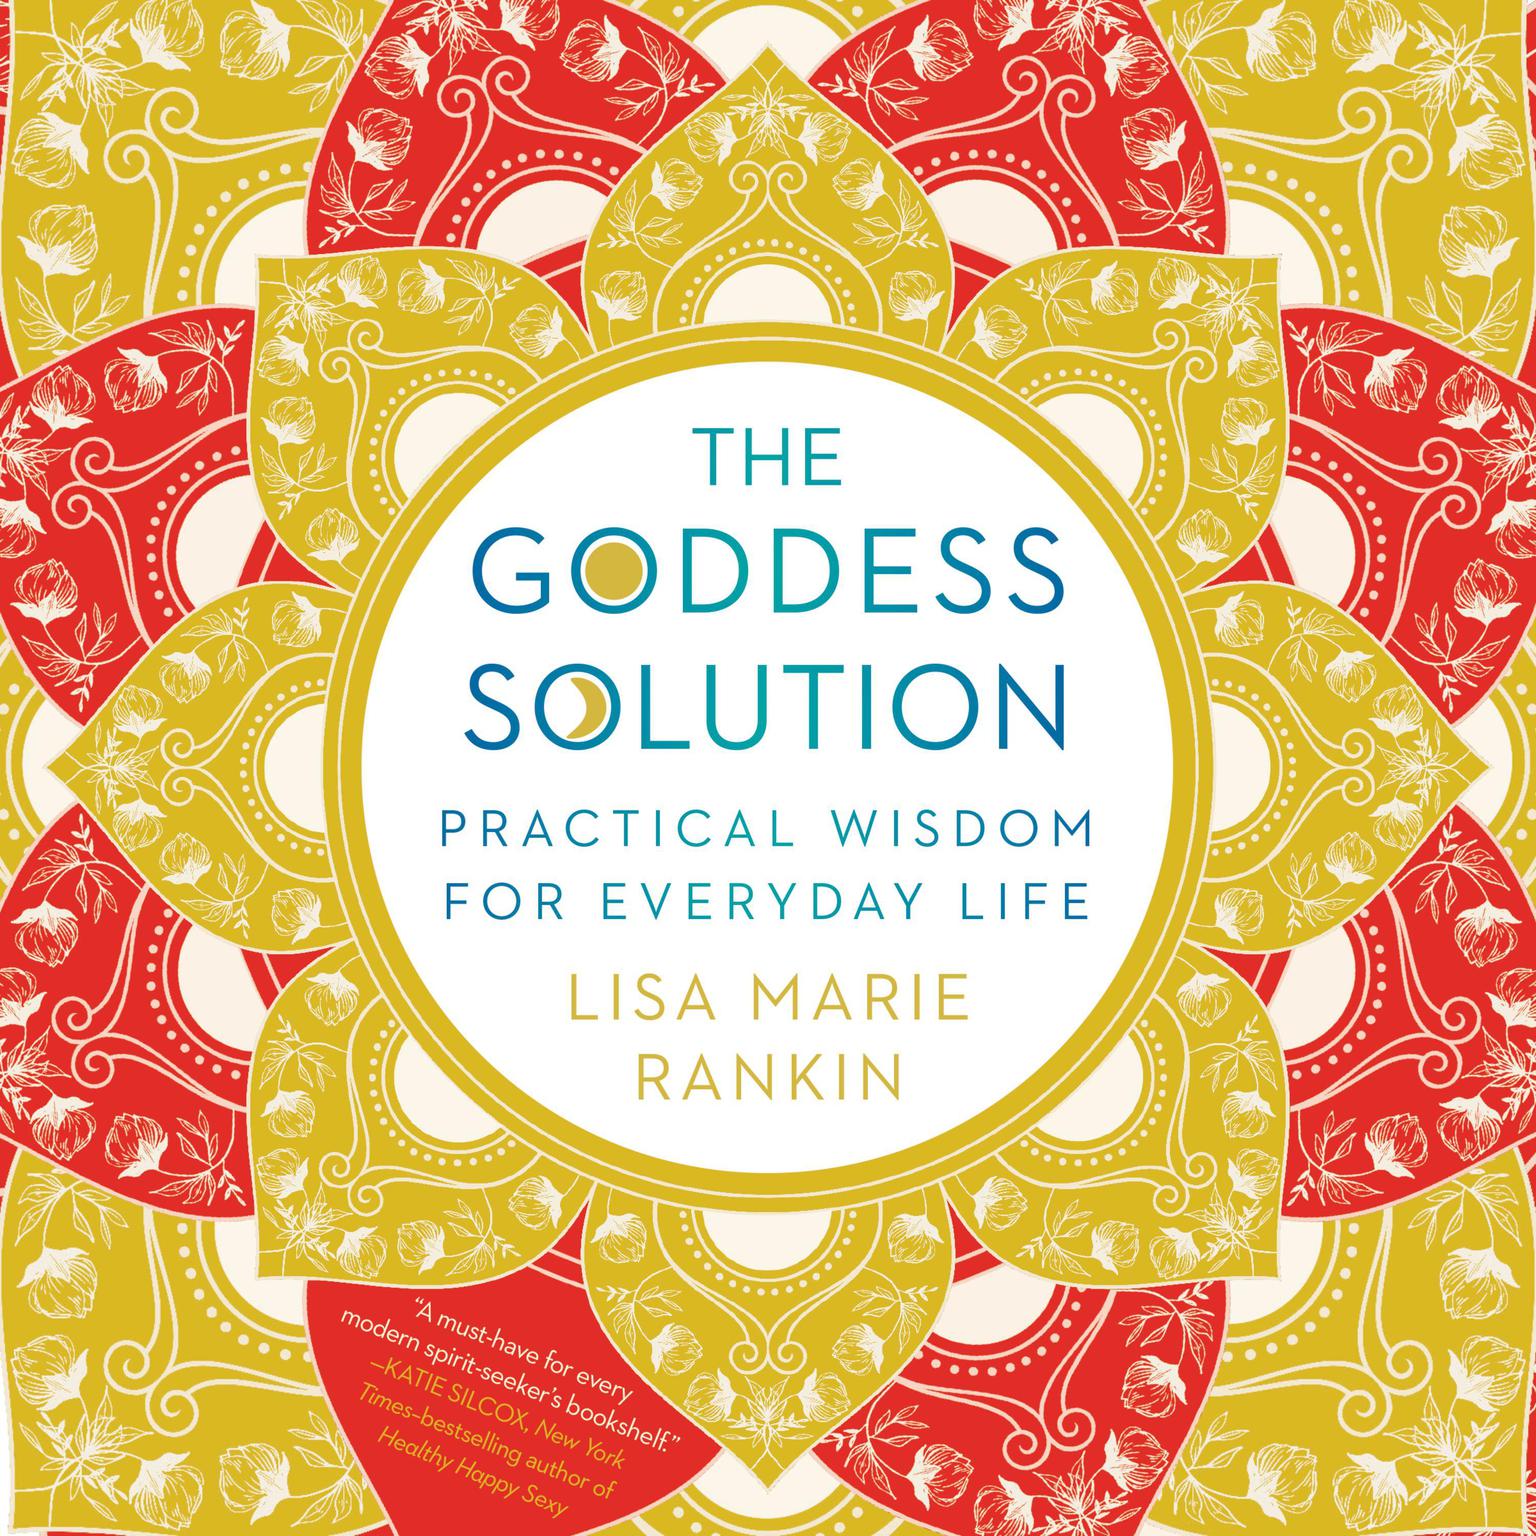 The Goddess Solution: Practical Wisdom for Everyday Life Audiobook, by Lisa Marie Rankin